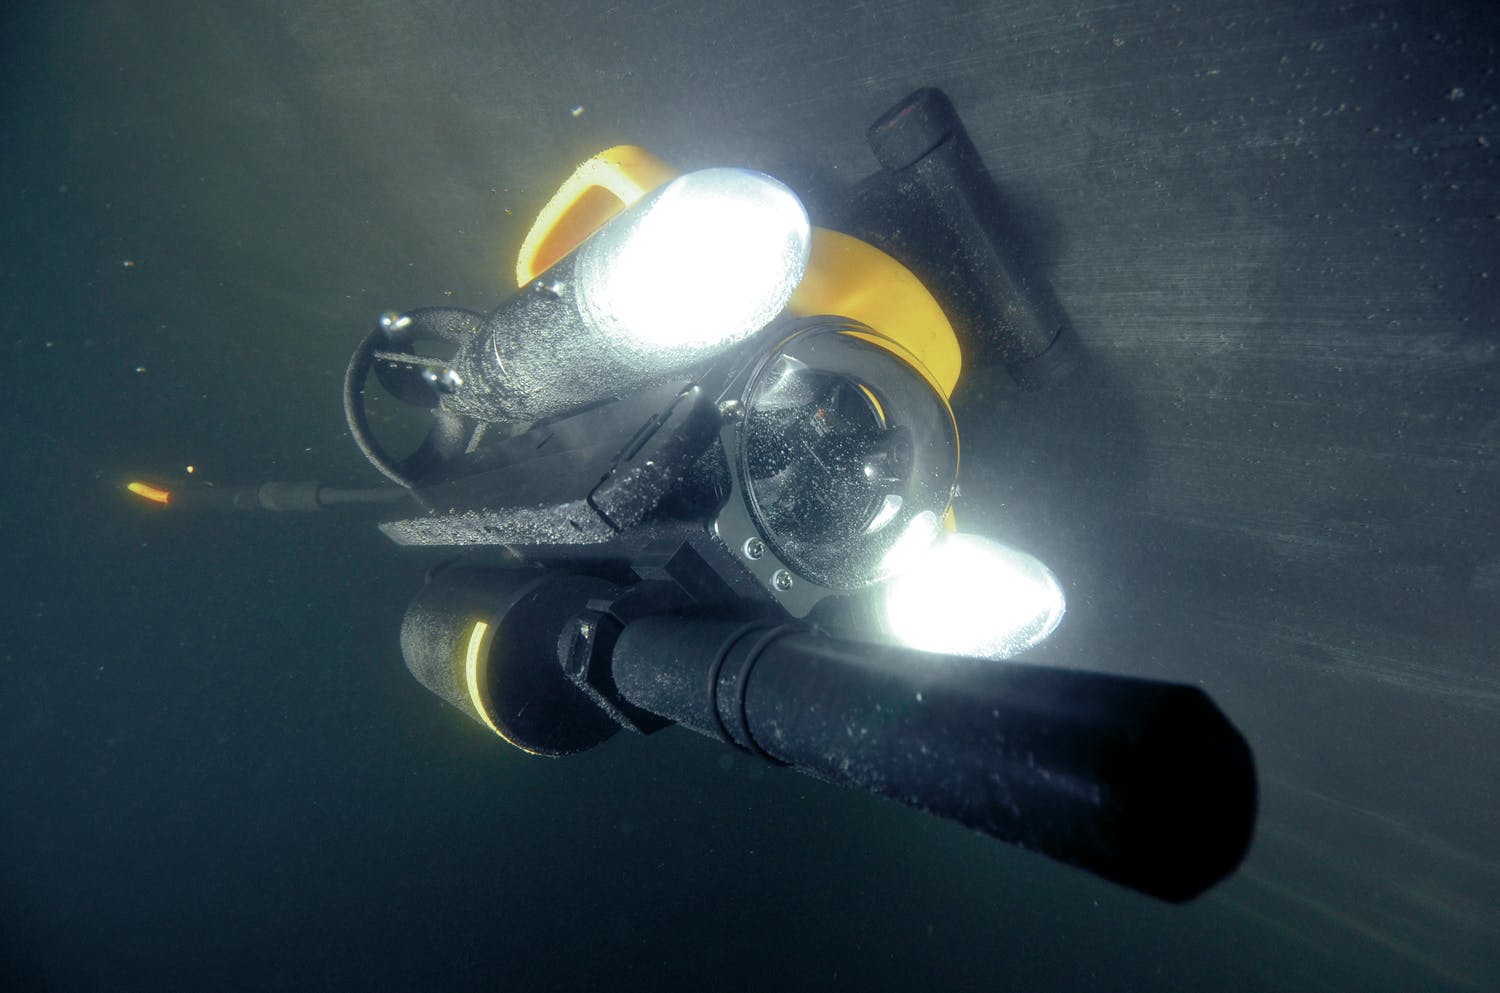 real-time performance monitoring using underwater ROV